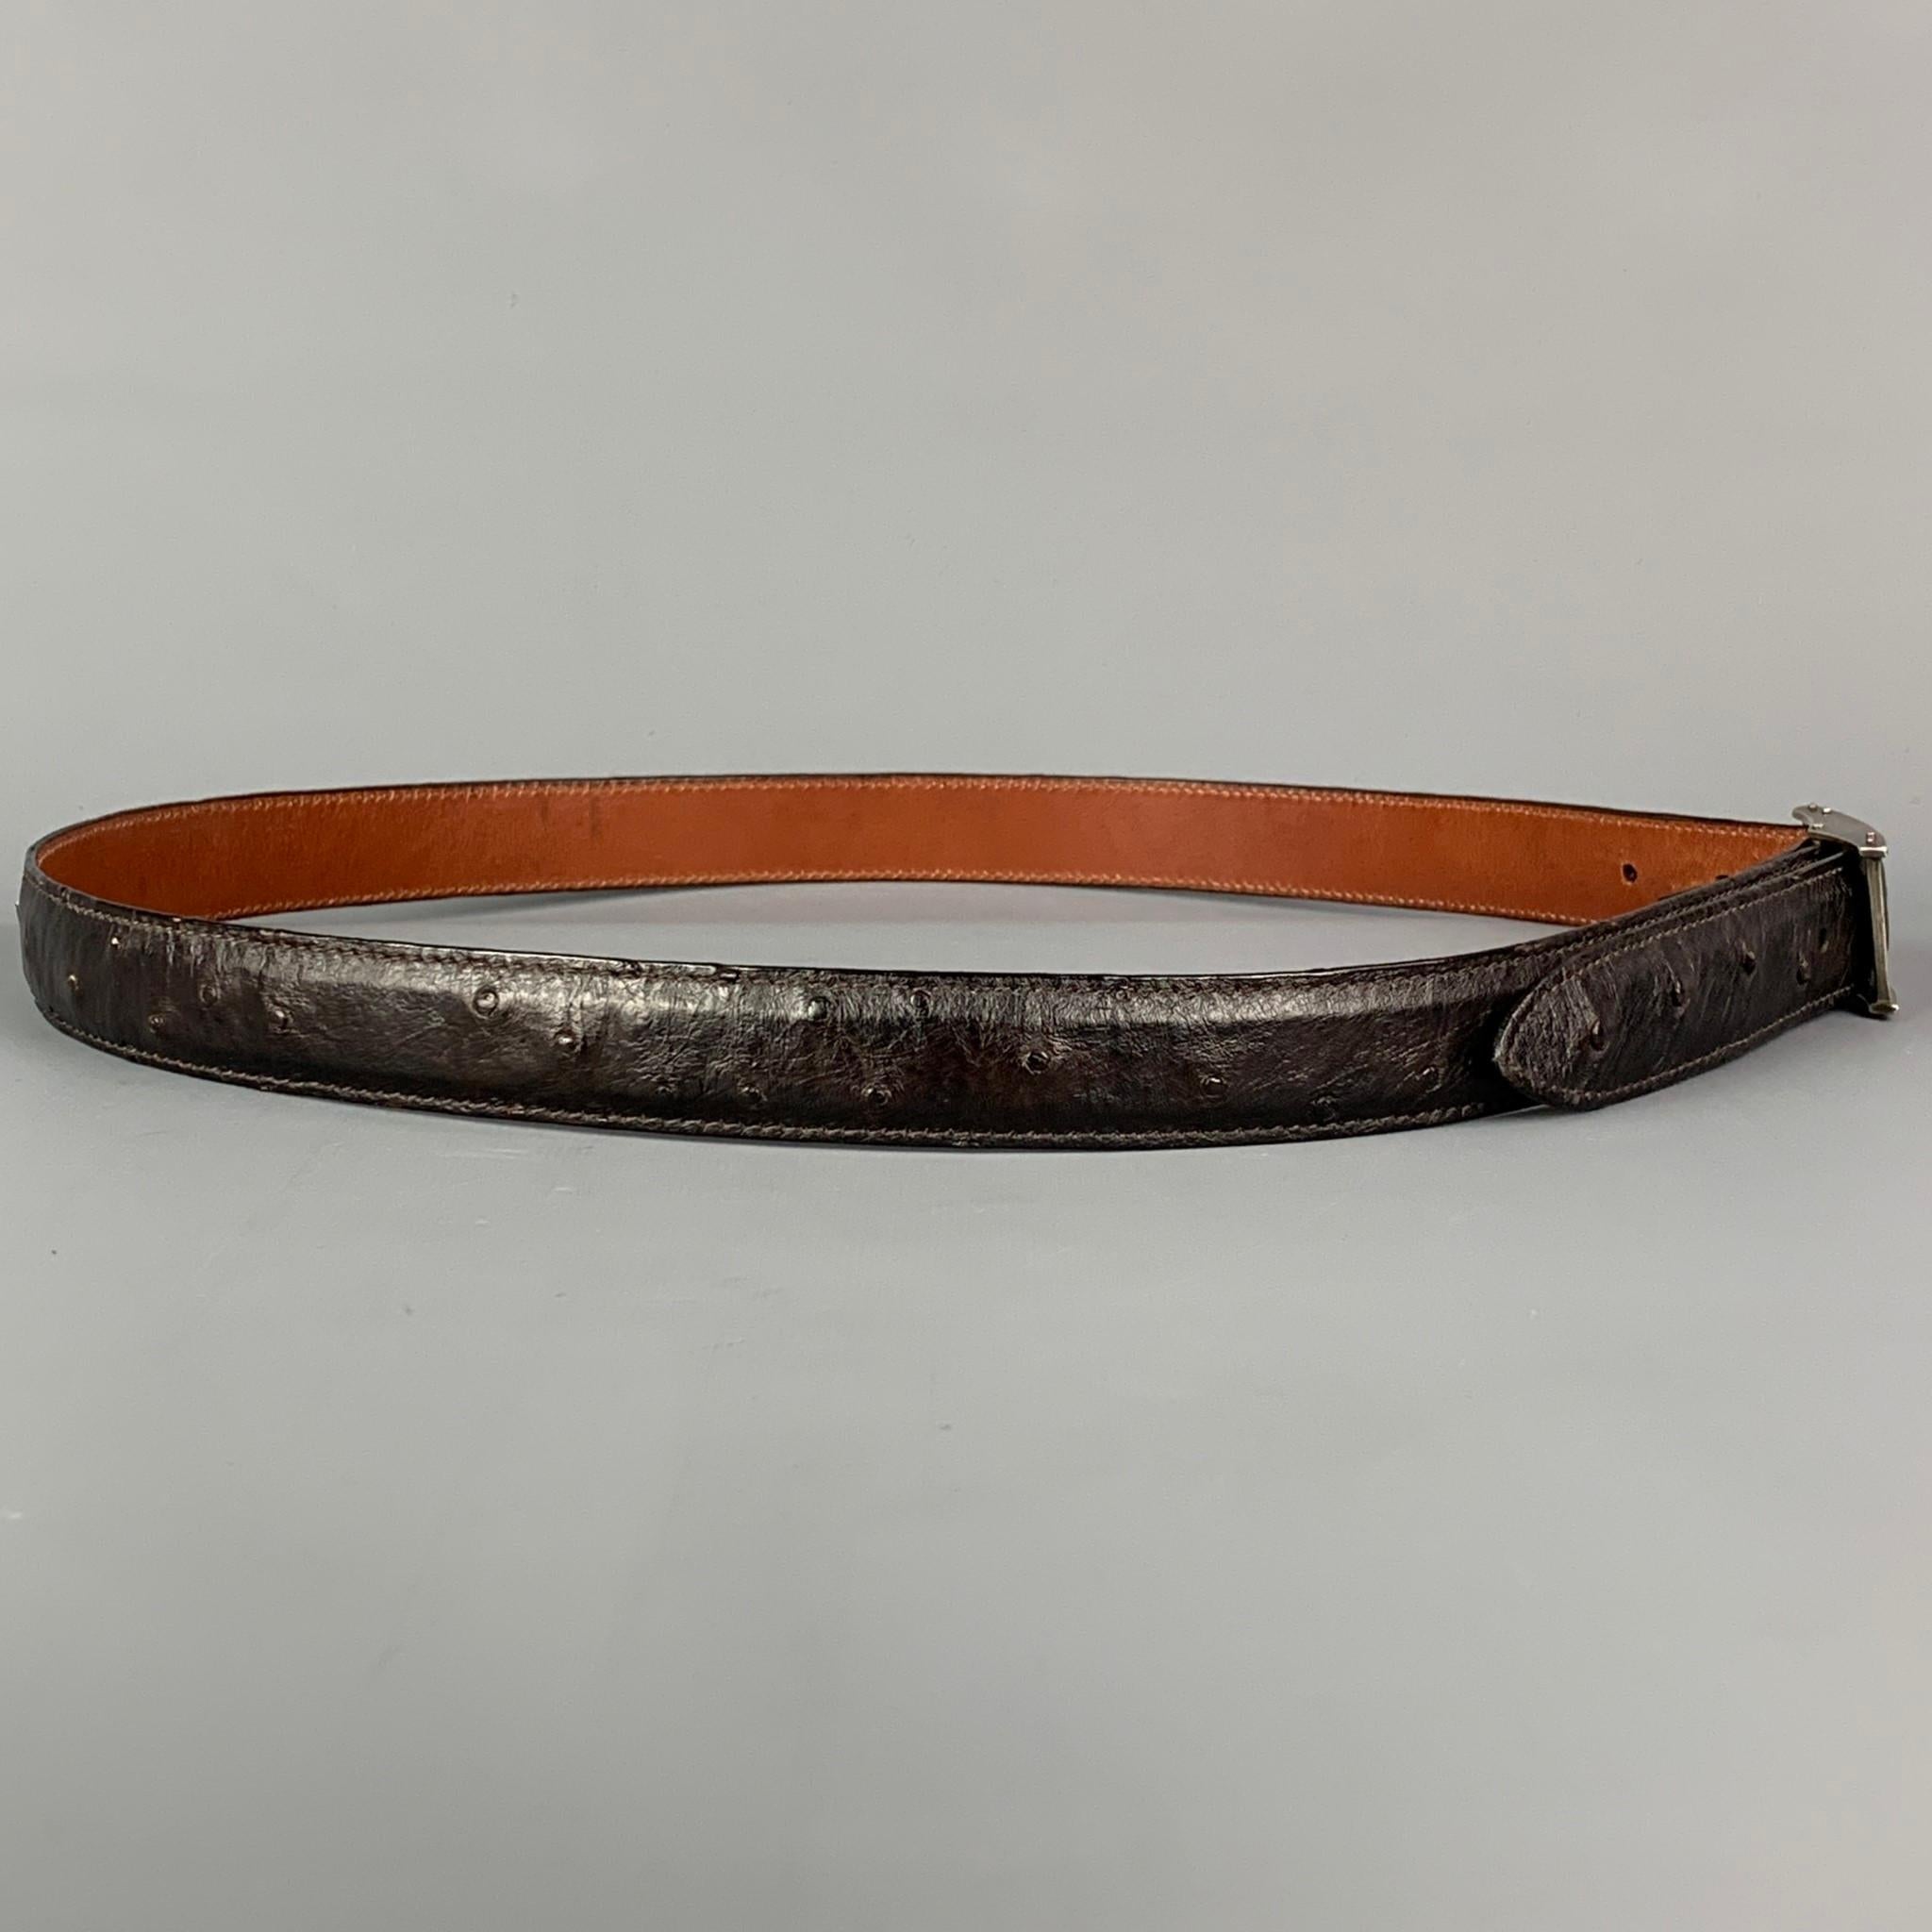 PAT AREIAS belt comes in a black ostrich leather featuring a sterling silver removable buckle. Made in USA. 

Very Good Pre-Owned Condition.
Marked: 36

Length: 43 in.
Width: 1 in.
Fits: 35 in. - 39 in.
Buckle: 2.25 in. 